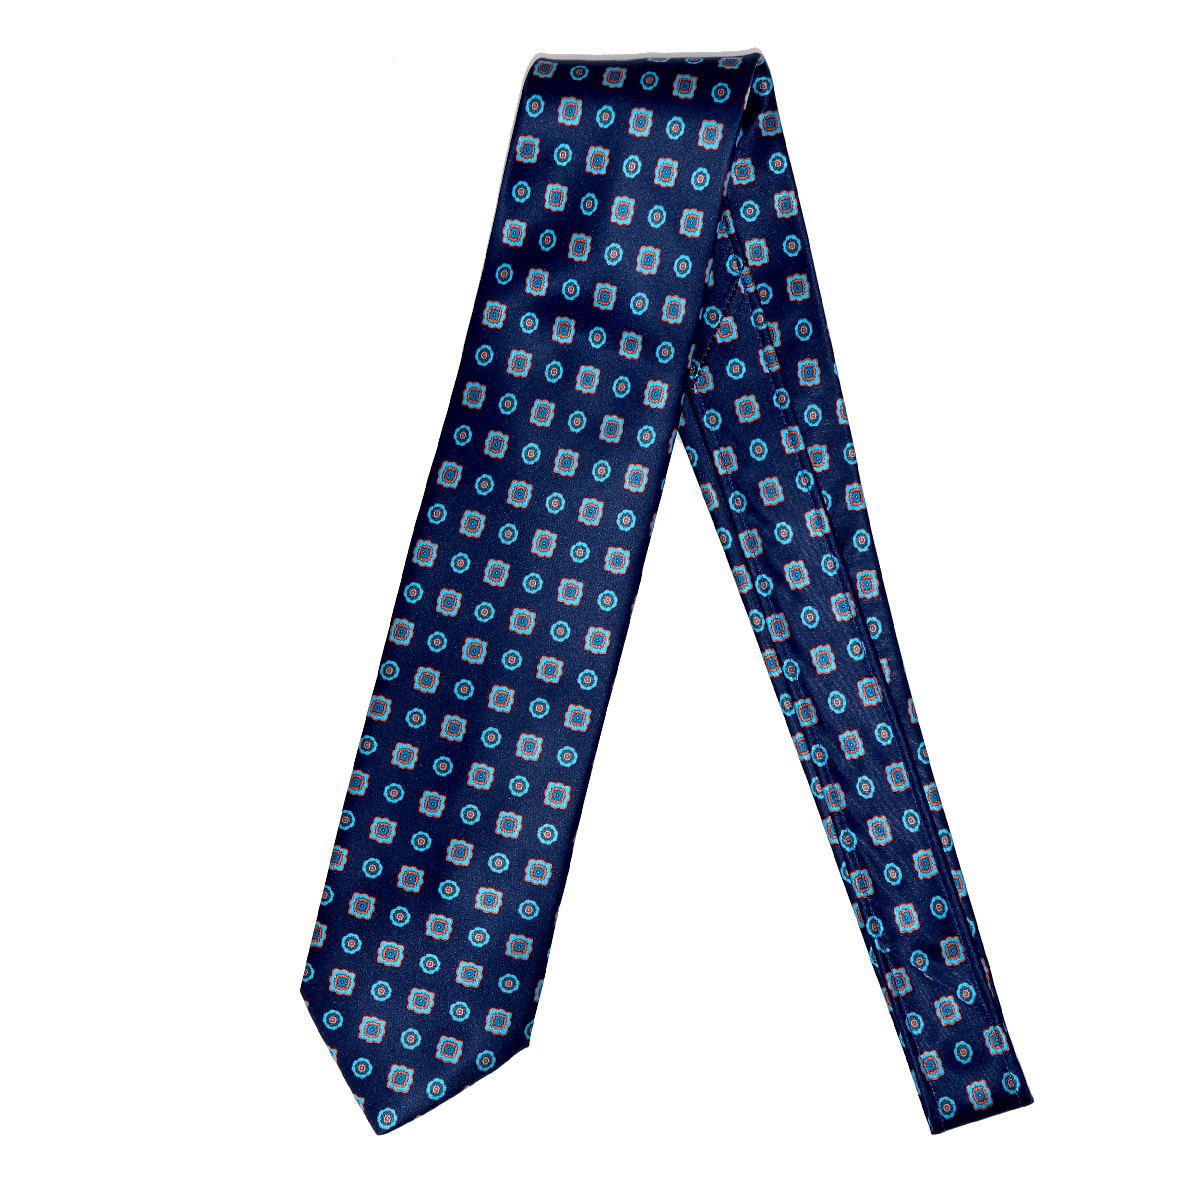 Business tie, 100% silk, navy blue background and light blue geometric ...